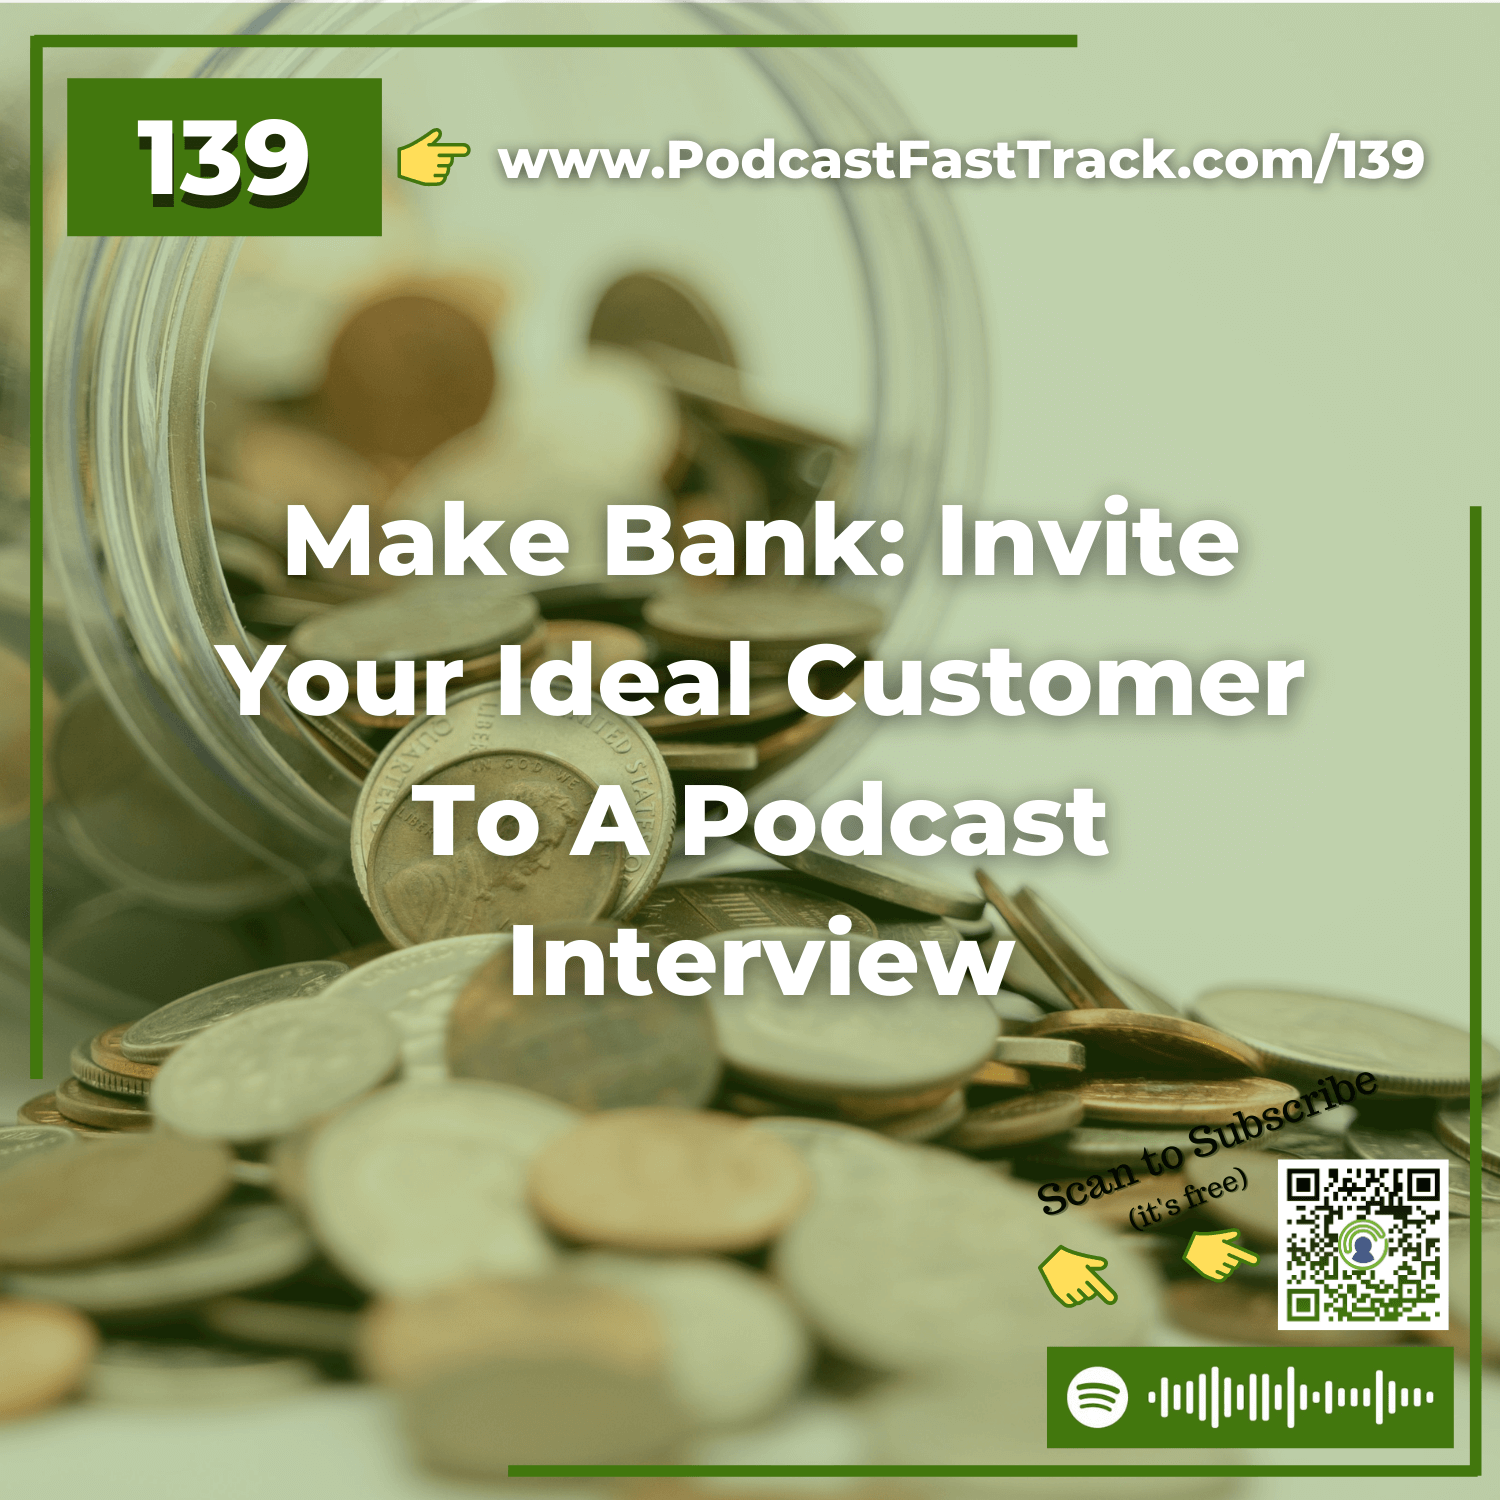 139: Make Bank: Invite Your Ideal Customer To A Podcast Interview